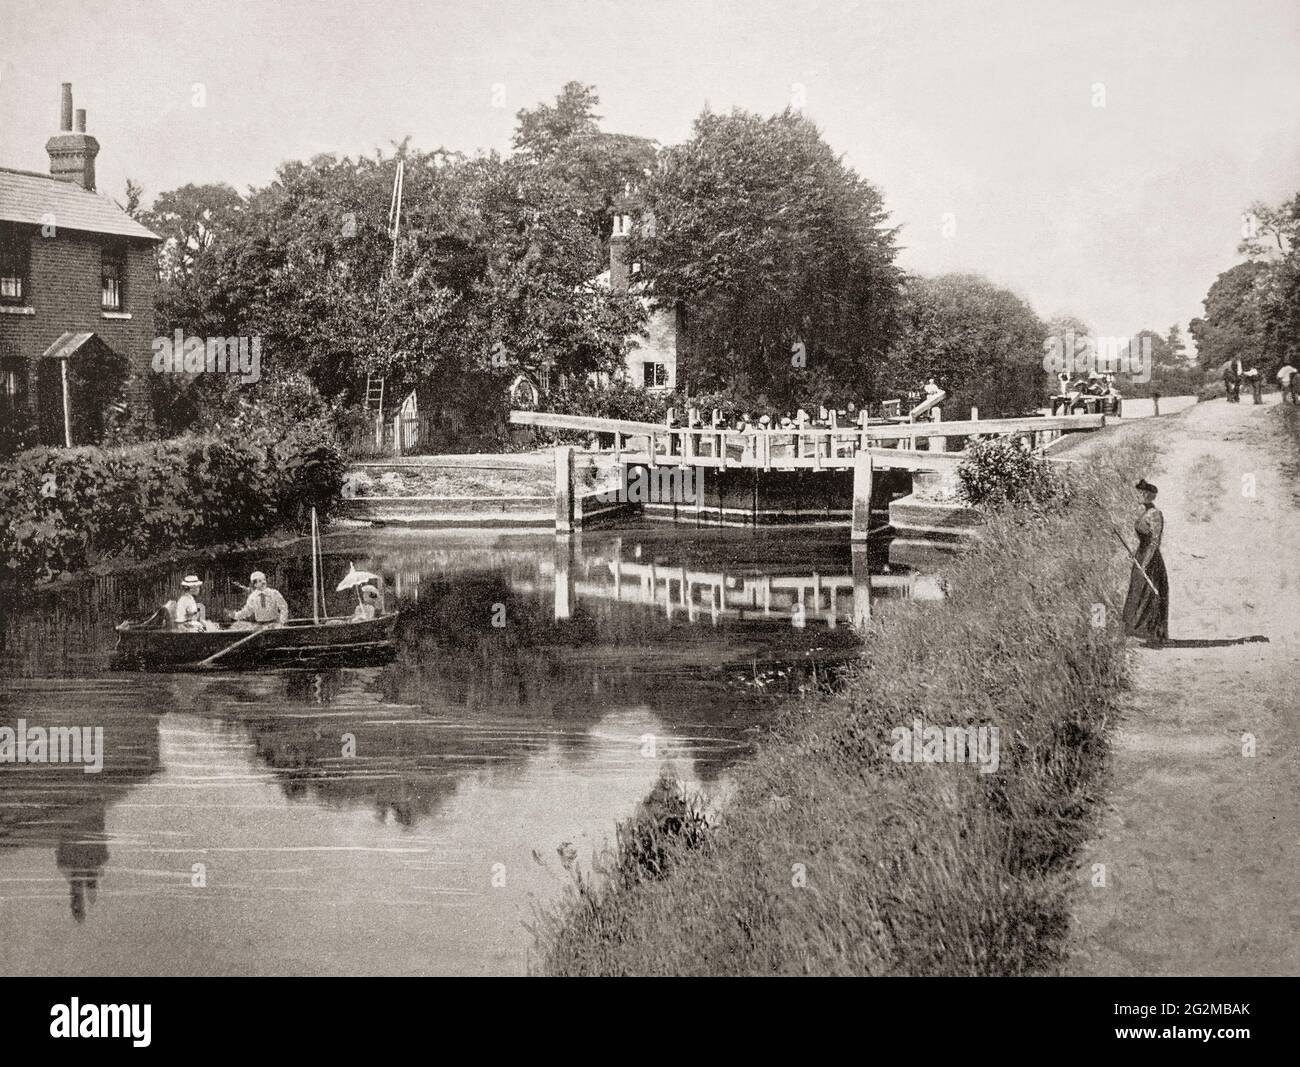 A late 19th century view of people in a rowing boat below Sonning Lock, a lock and associated weir situated on the River Thames at the village of Sonning near Reading, Berkshire, England. The first lock was built by the Thames Navigation Commission in 1773 and it has been rebuilt three times since then, the last time being 1868. Stock Photo